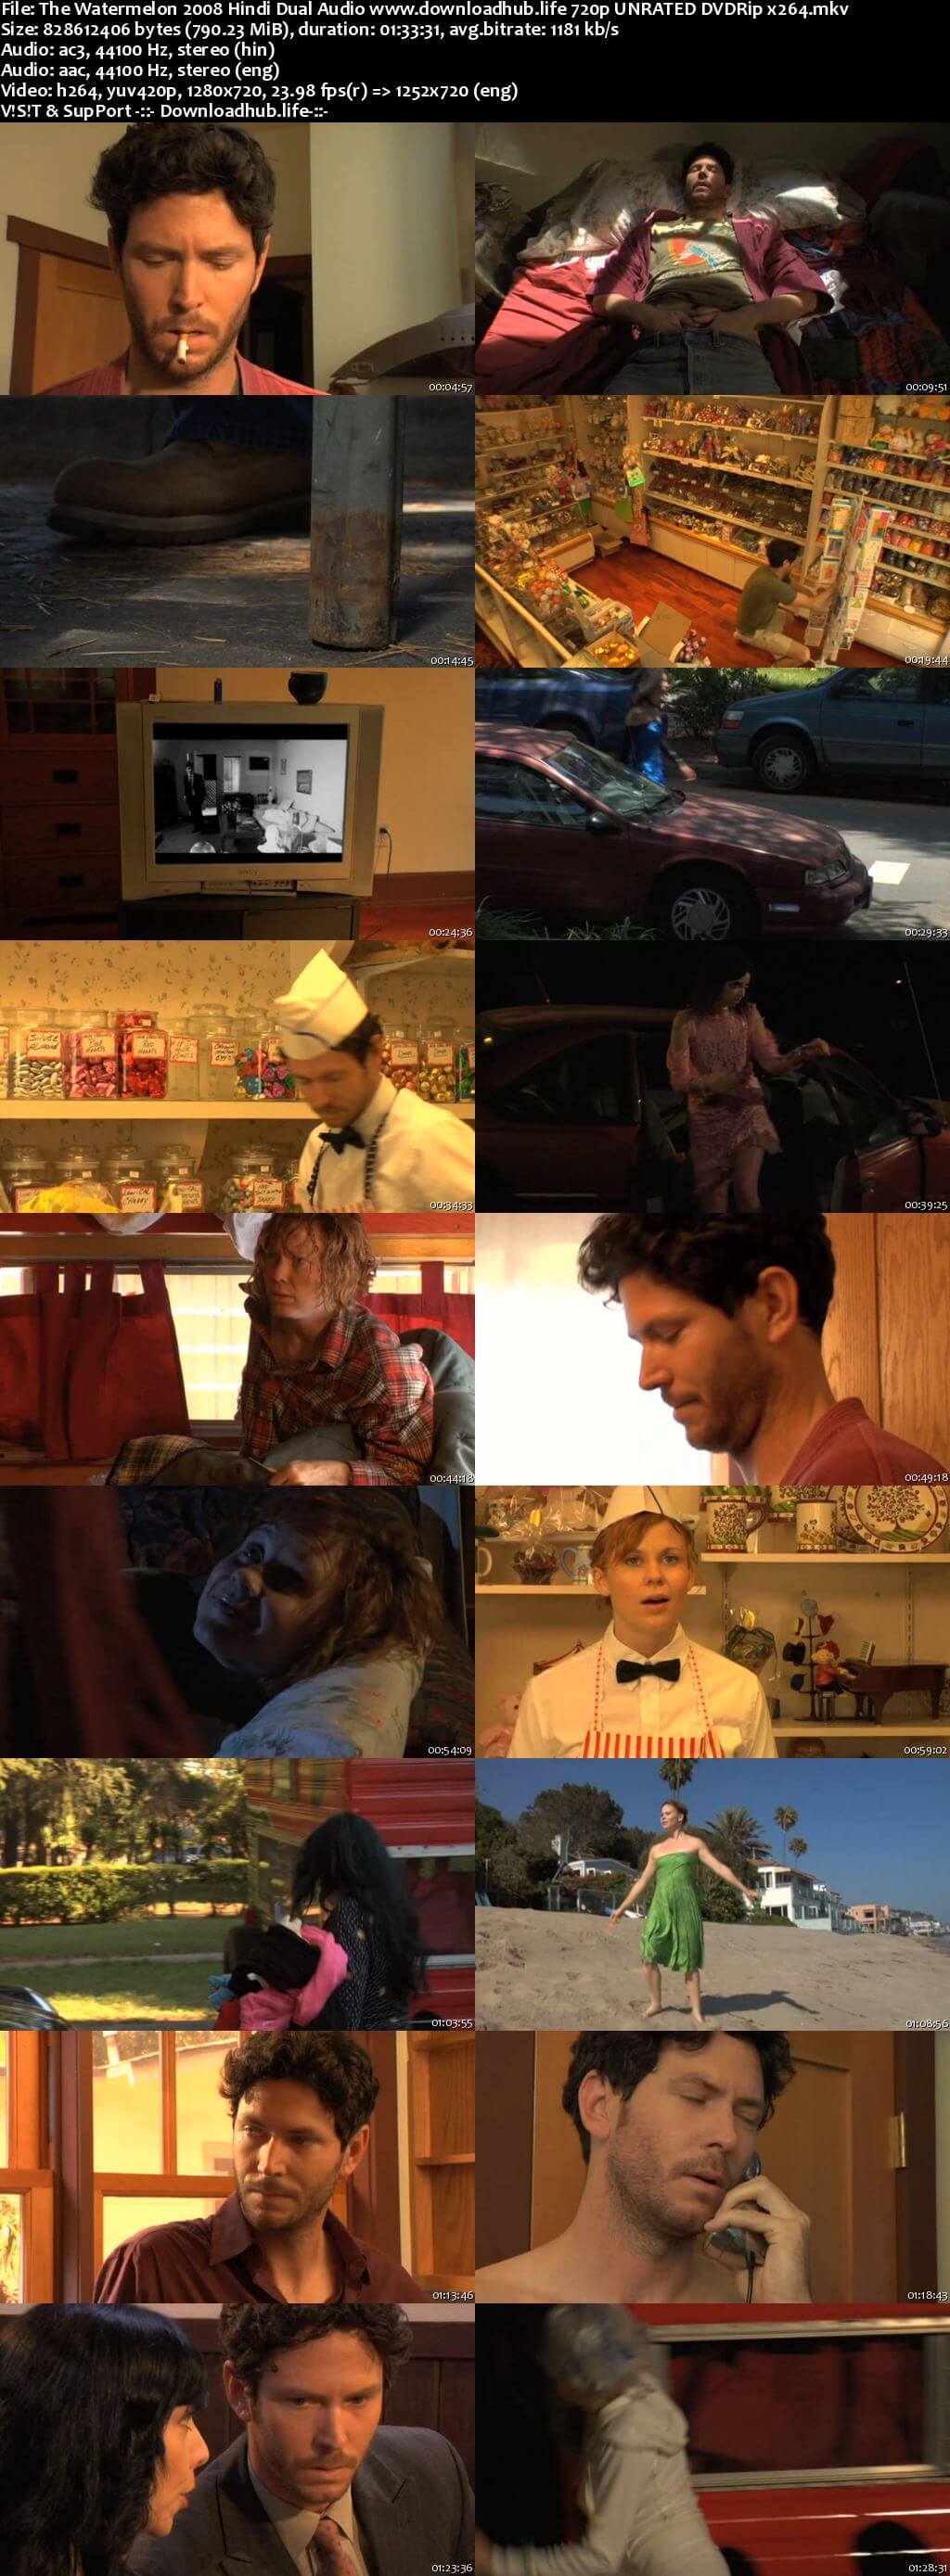 The Watermelon 2008 Hindi Dual Audio 720p UNRATED DVDRip x264